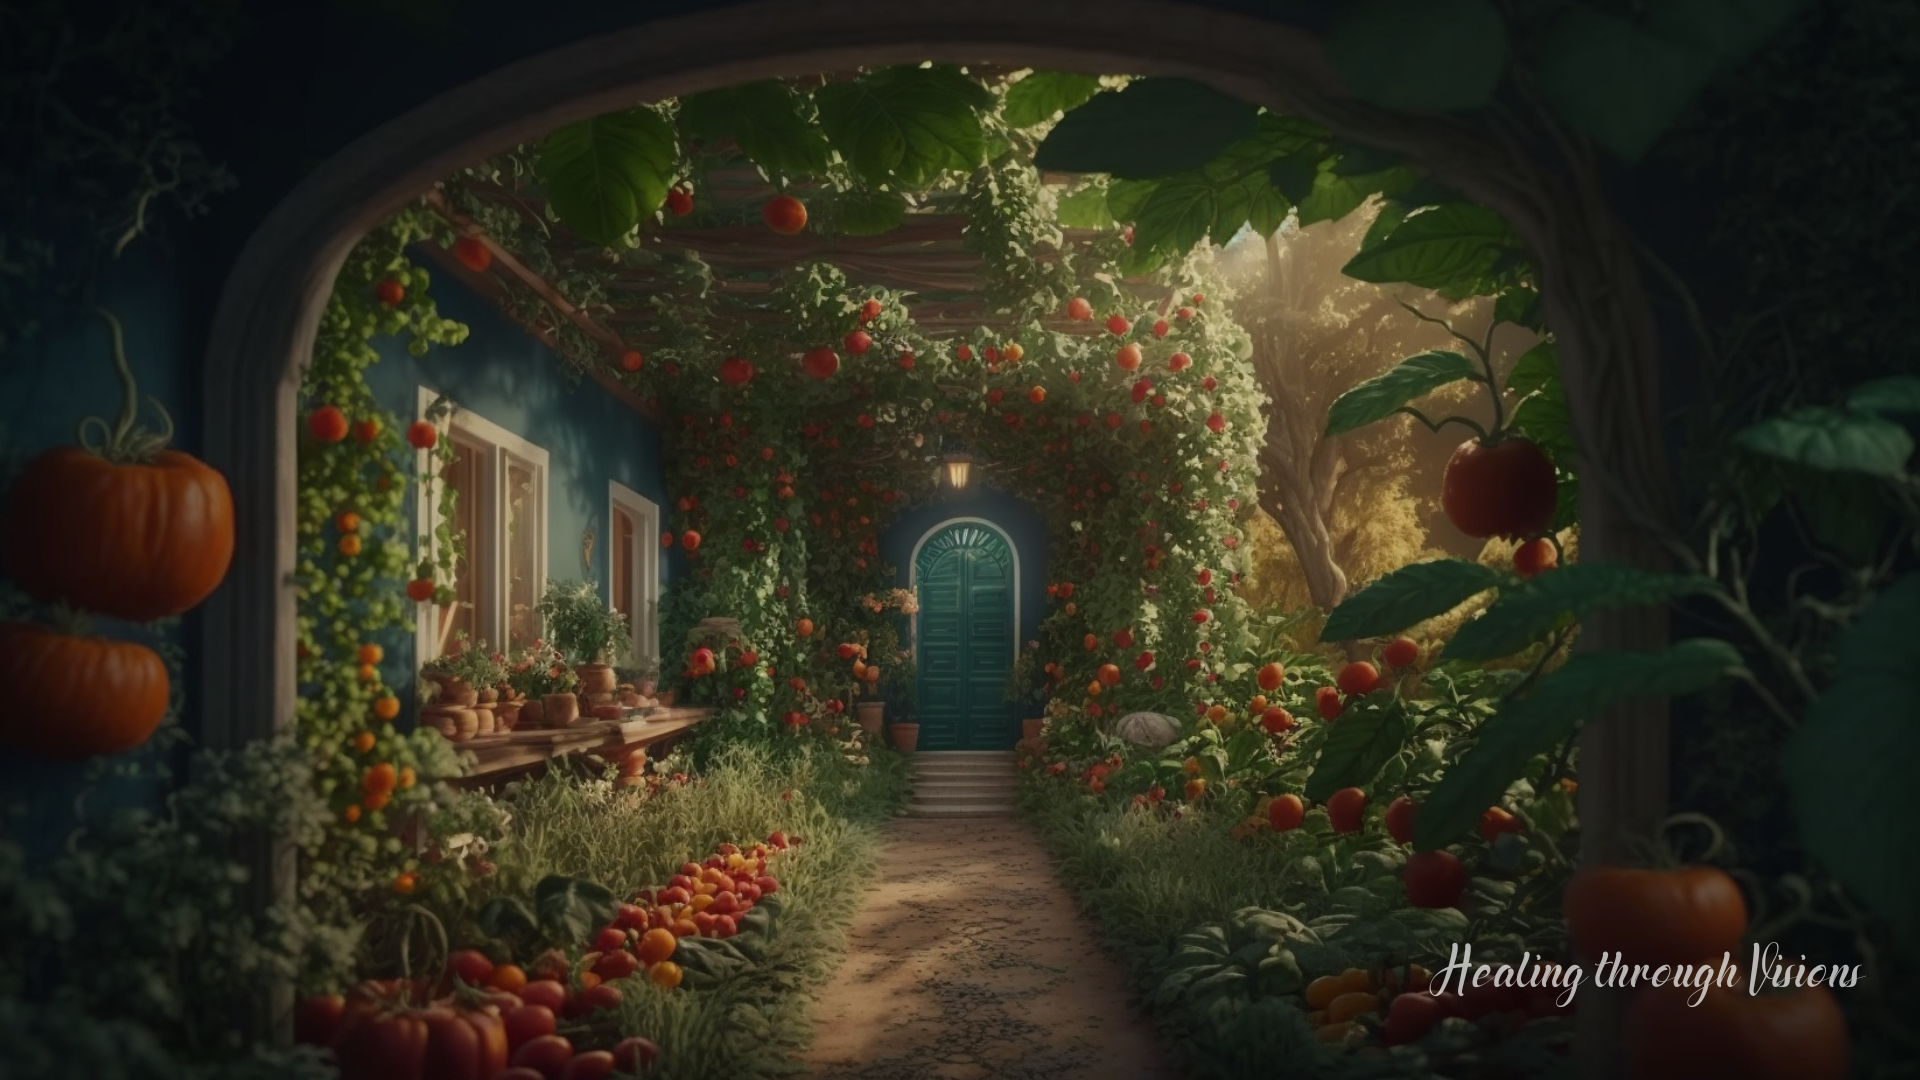 A magical garden, overflowing with life and vibrant colors. The garden is full of tall tomato plants, their plump red fruit peeking out between green leaves. Pothos plants hang from trellises, their long vines trailing down to touch the lush grass below, the tomatoes' shapes adding to the abundance of the garden.